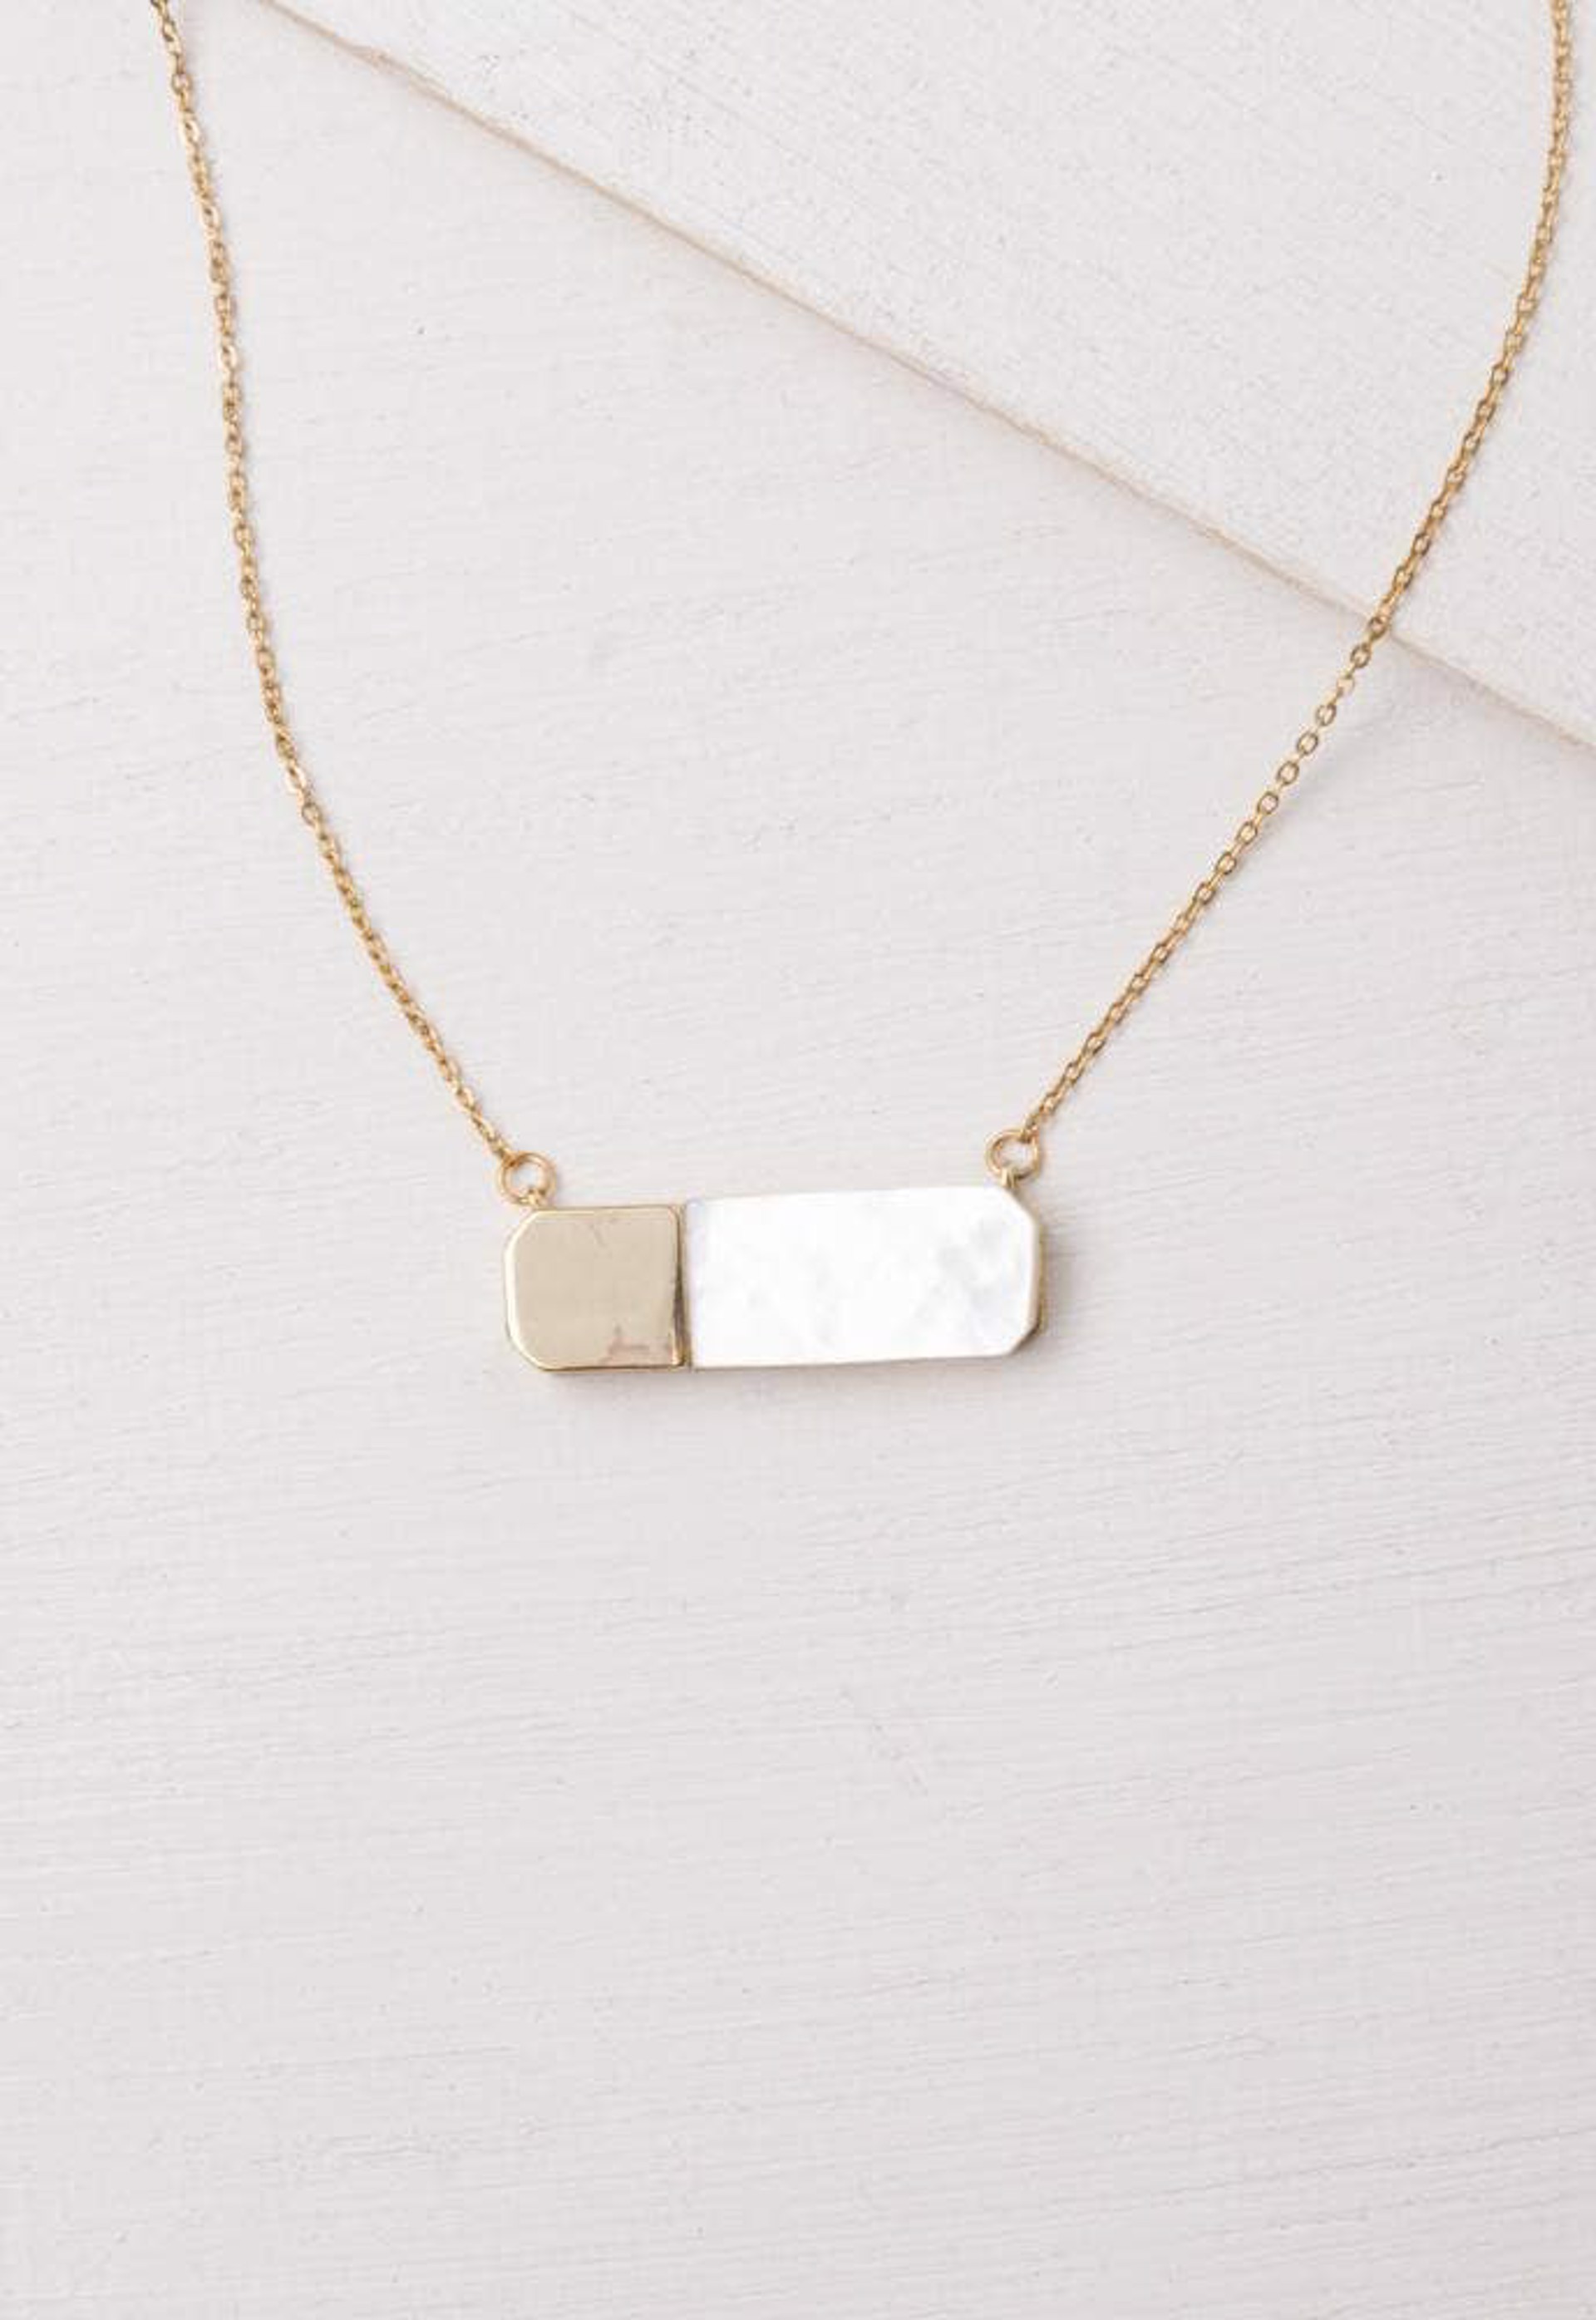 Courage Light and Gold Necklace by Starfish Project